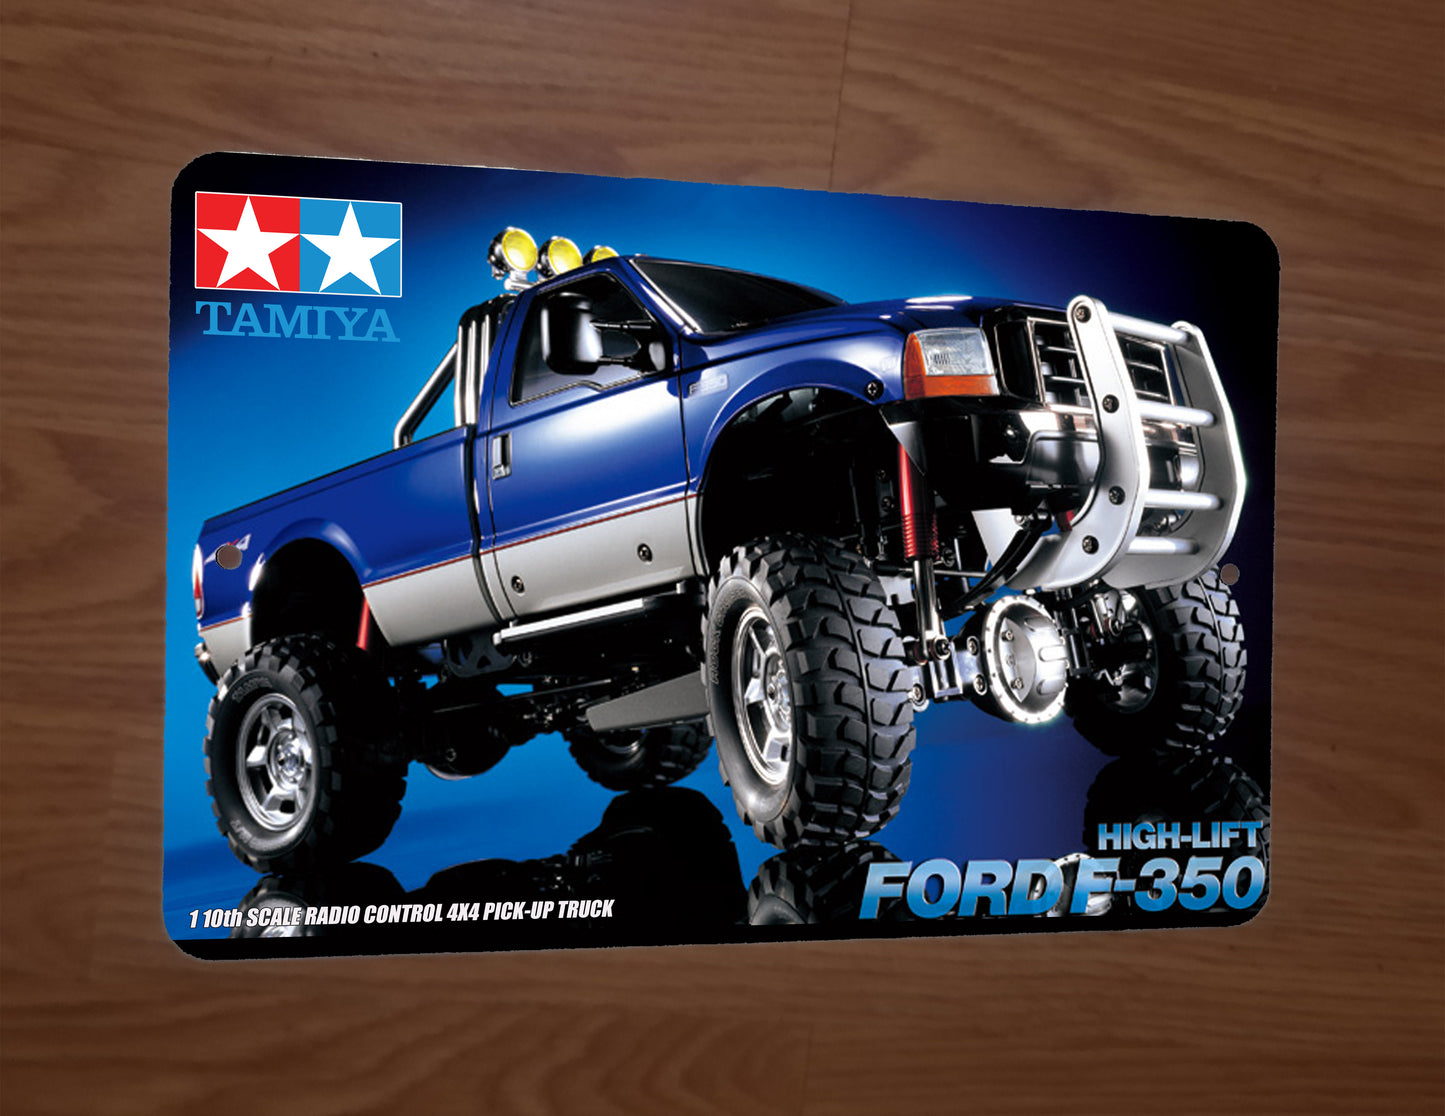 High Lift Ford F-350 Remote Radio Control Off Road 4x4 Pick-Up Truck 8x12 Metal Wall RC Car Sign Garage Poster